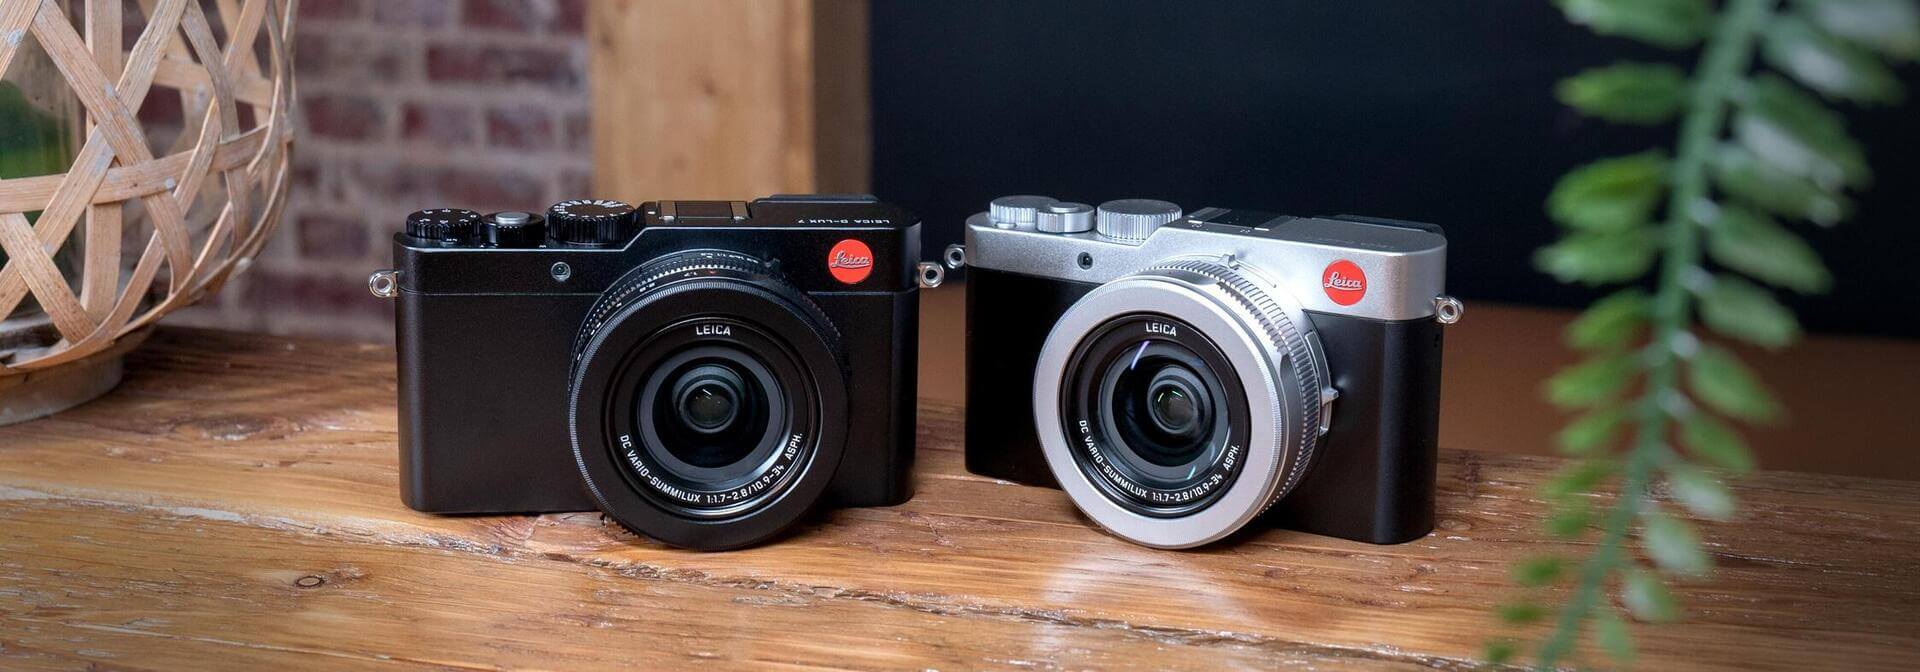 Leica D-Lux 7: The Users Guide to Mastering Leica D-Lux 7 for